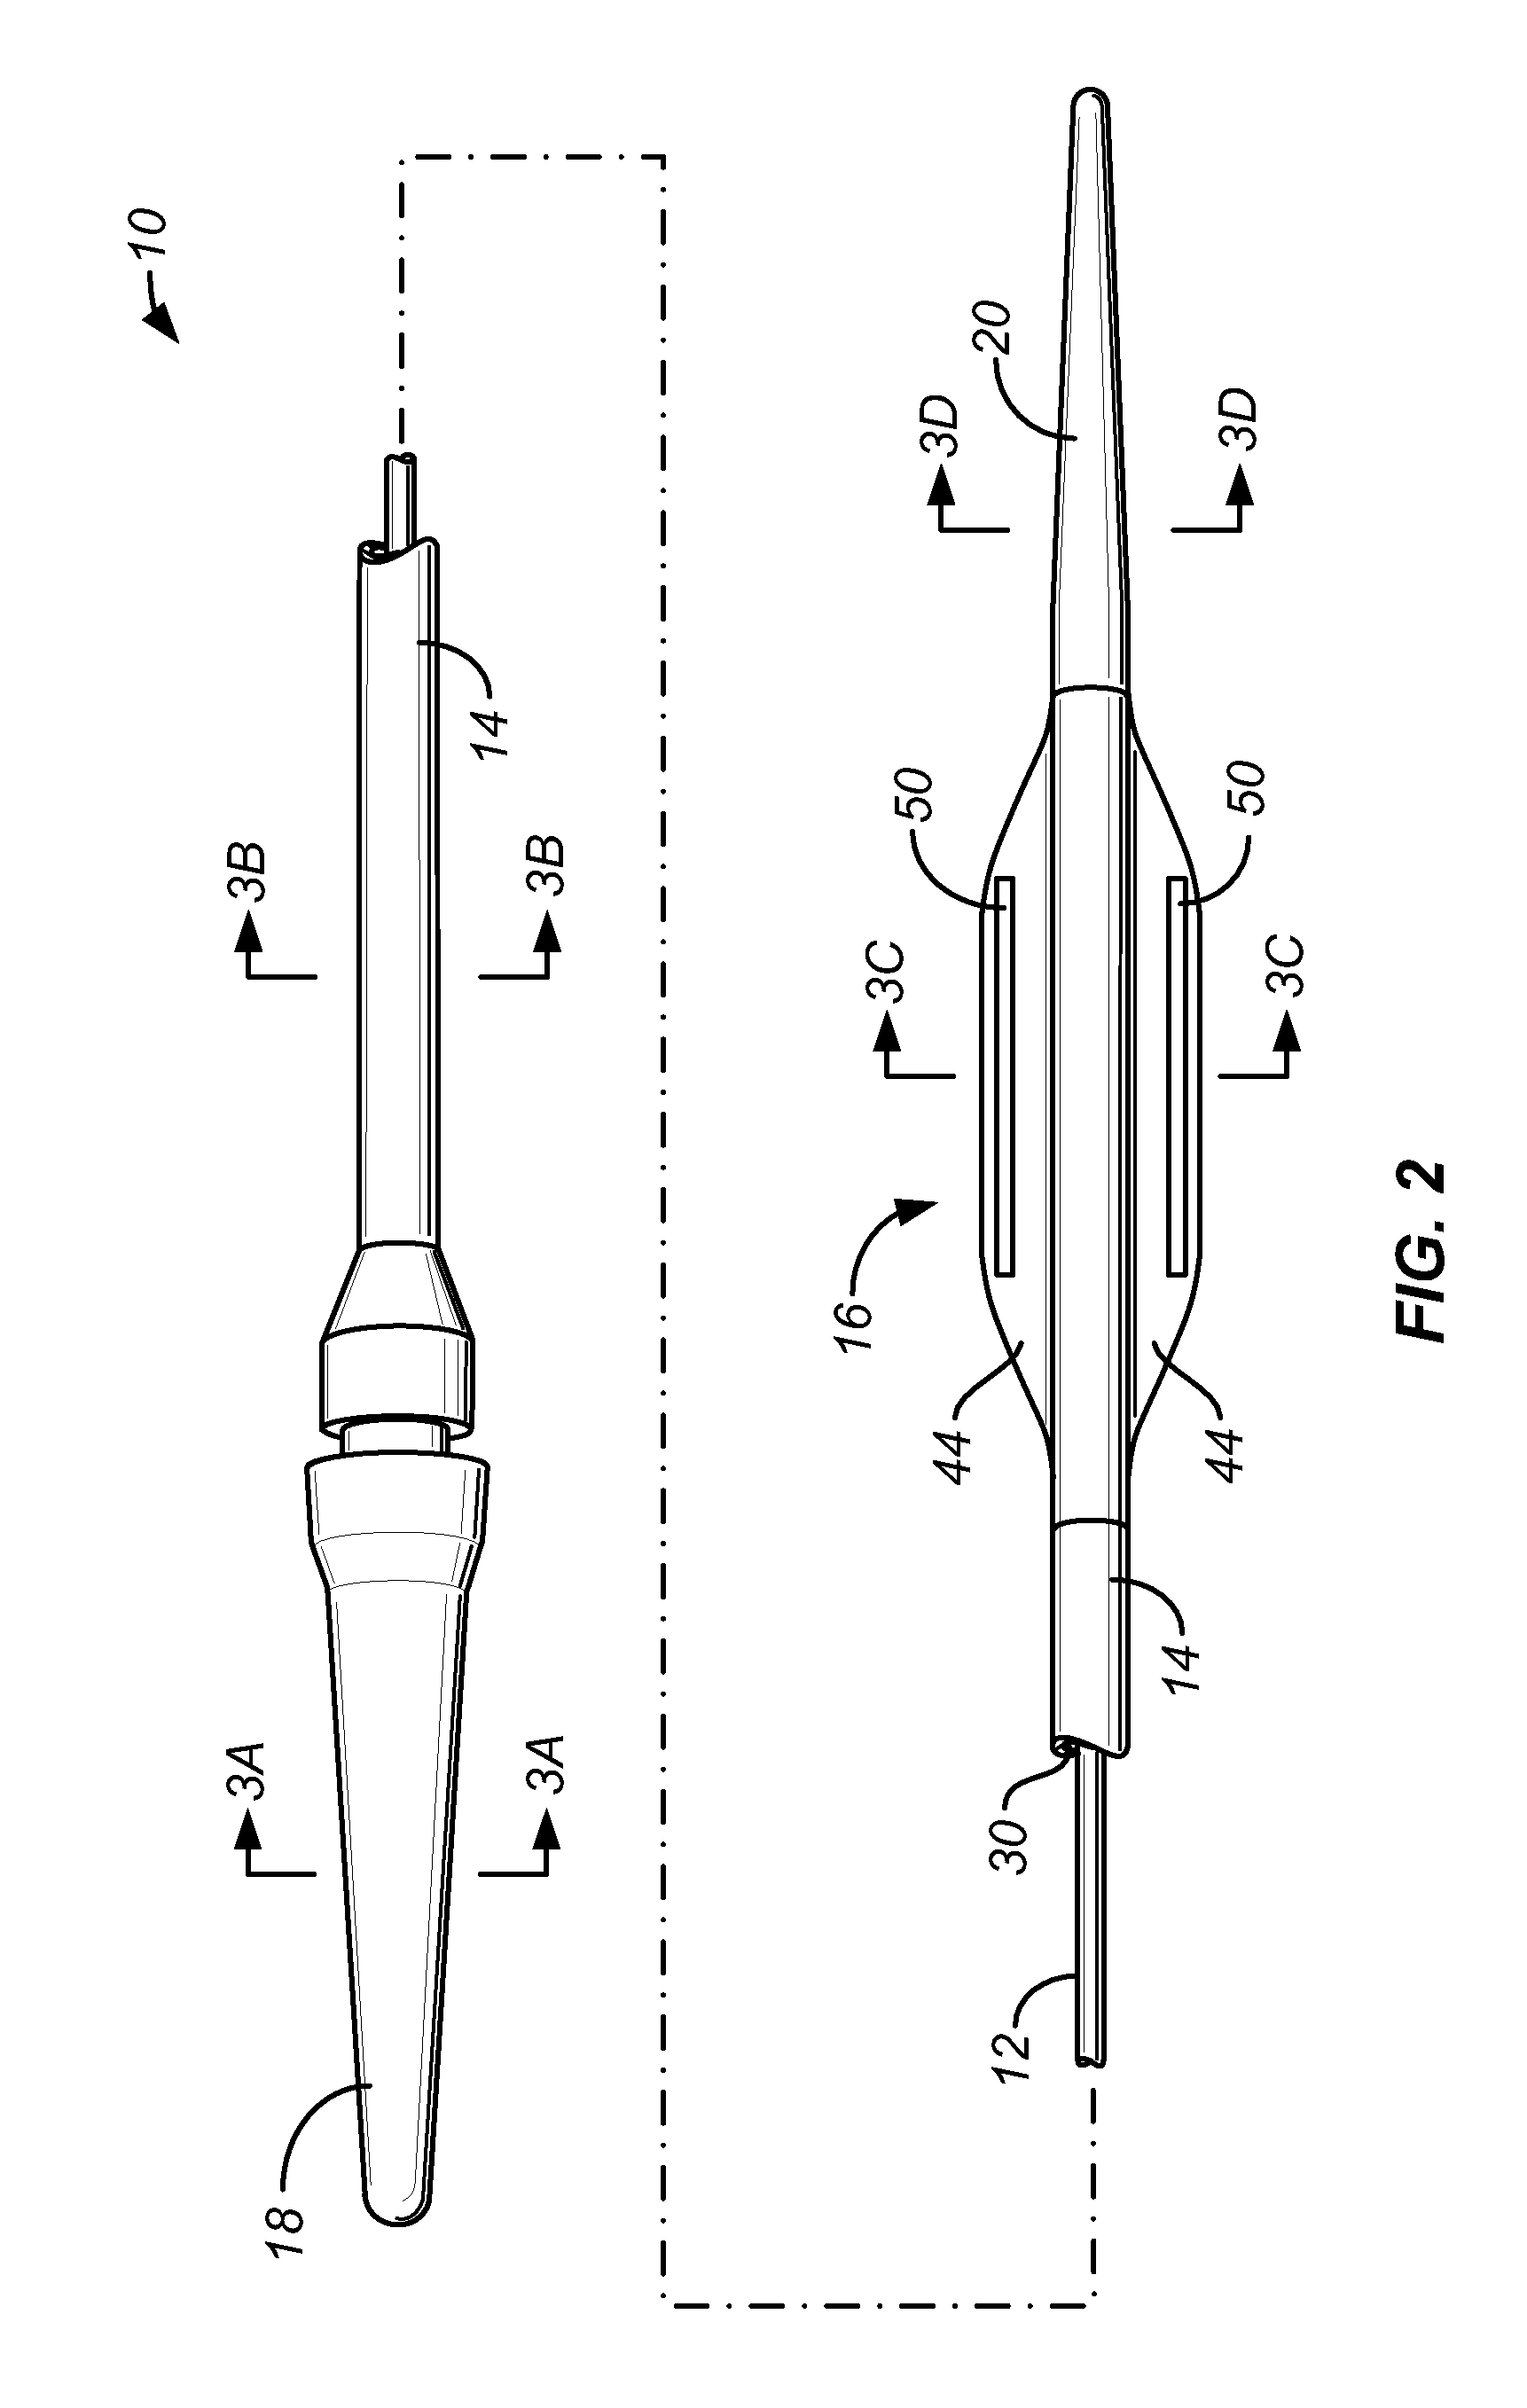 Apparatus for occluding body lumens